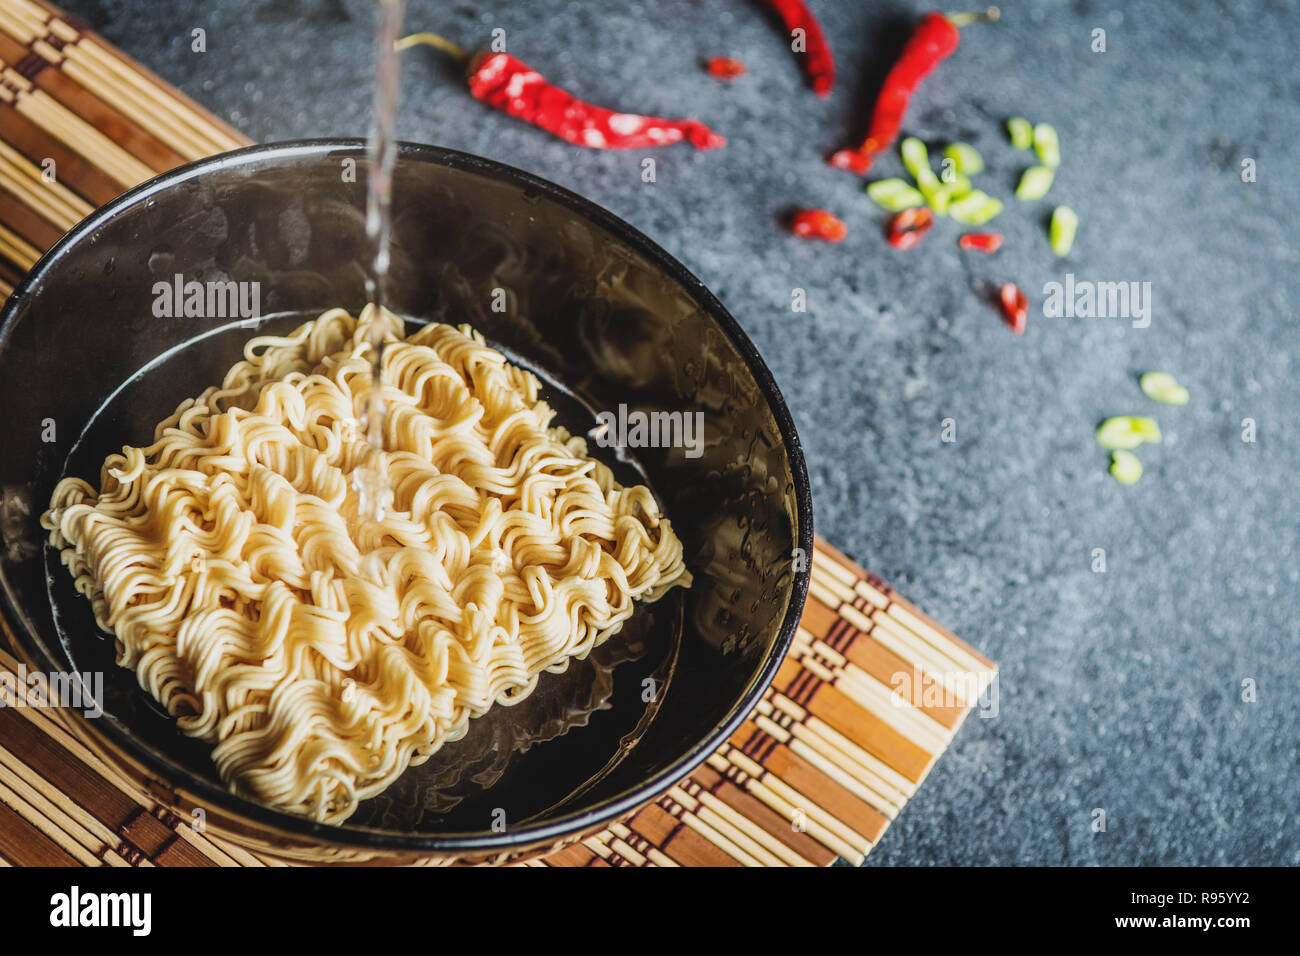 Black bowl of asian instant noodles with hot water and red chili peppers and green onion and chopsticks Stock Photo